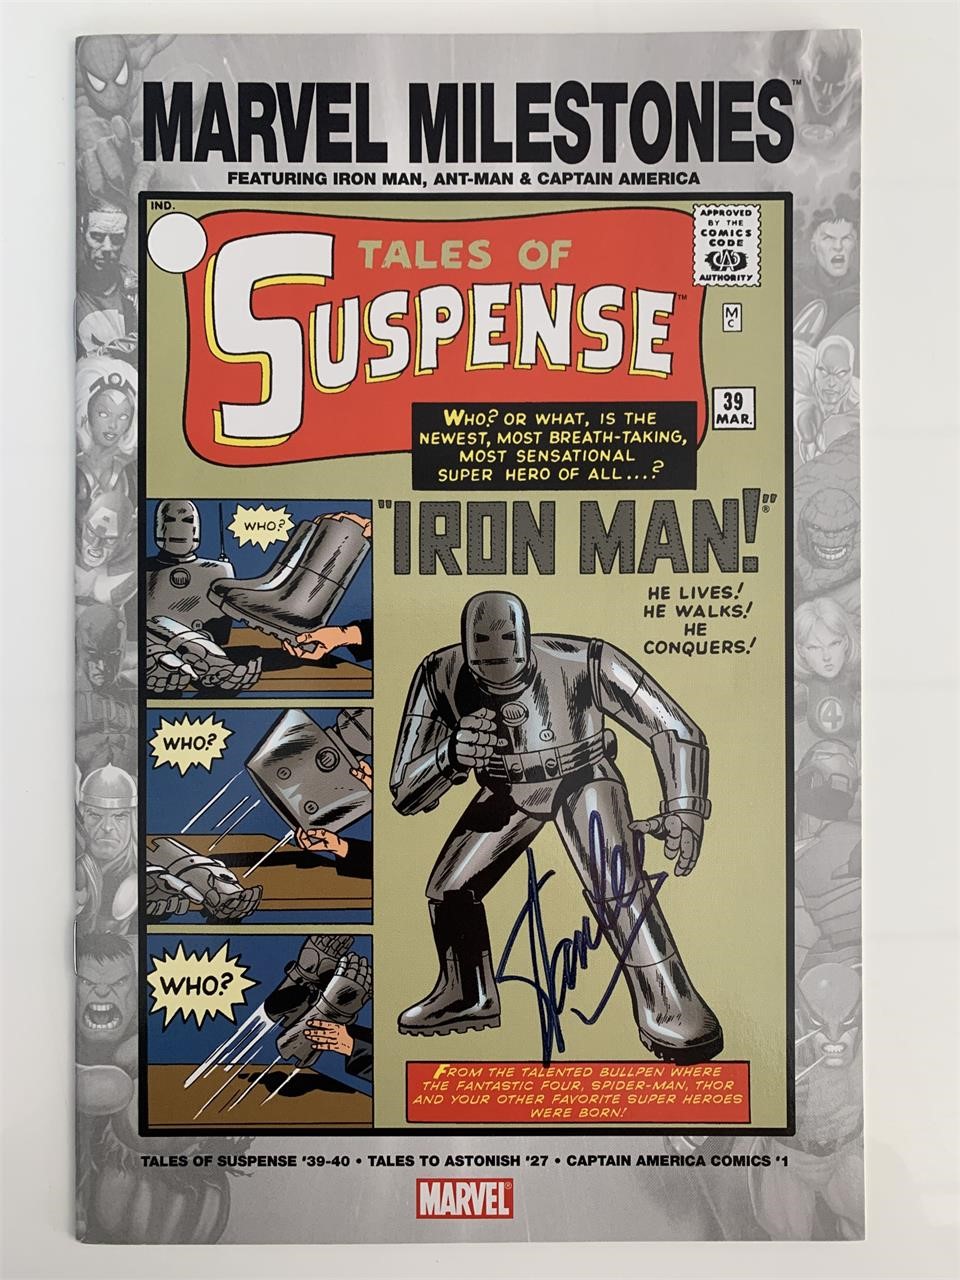 Stan Lee signed Tales Of Suspense comic book